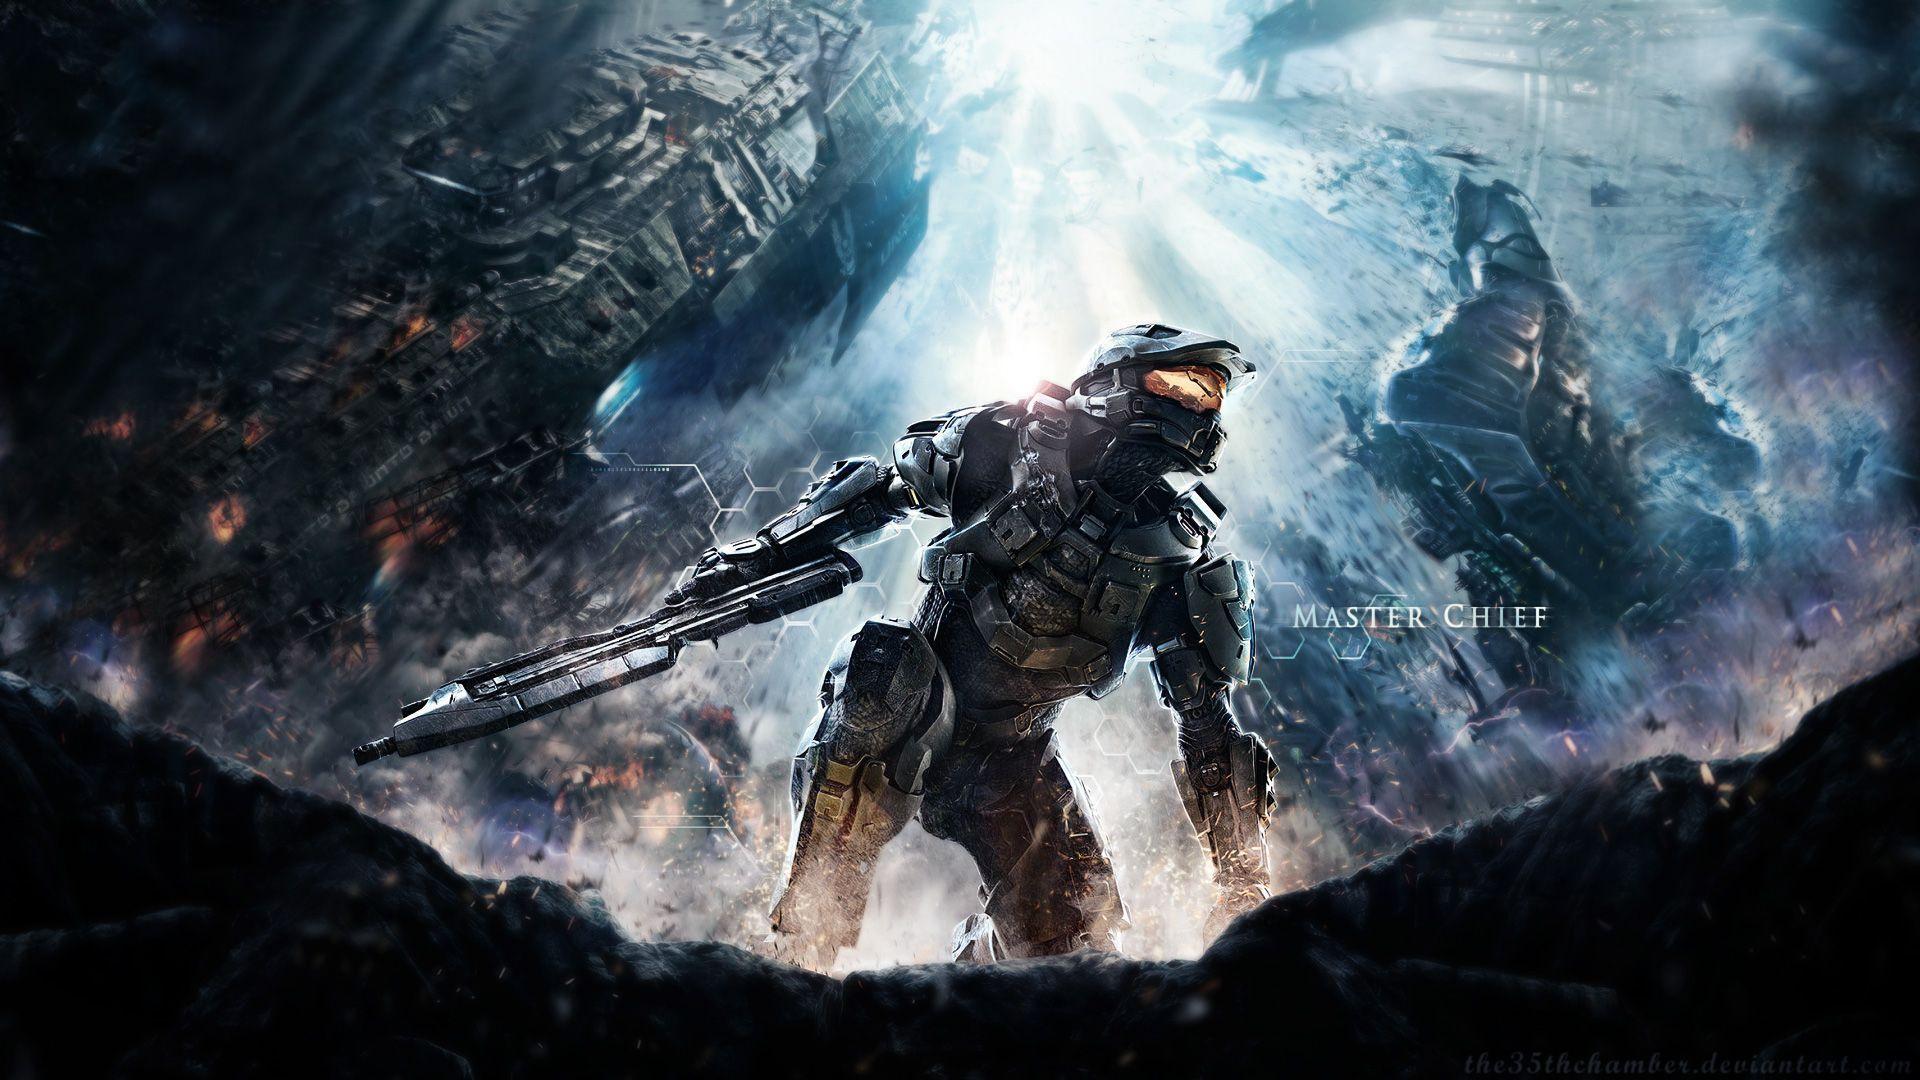 Halo 4 Computer Background Wallpaper and Background